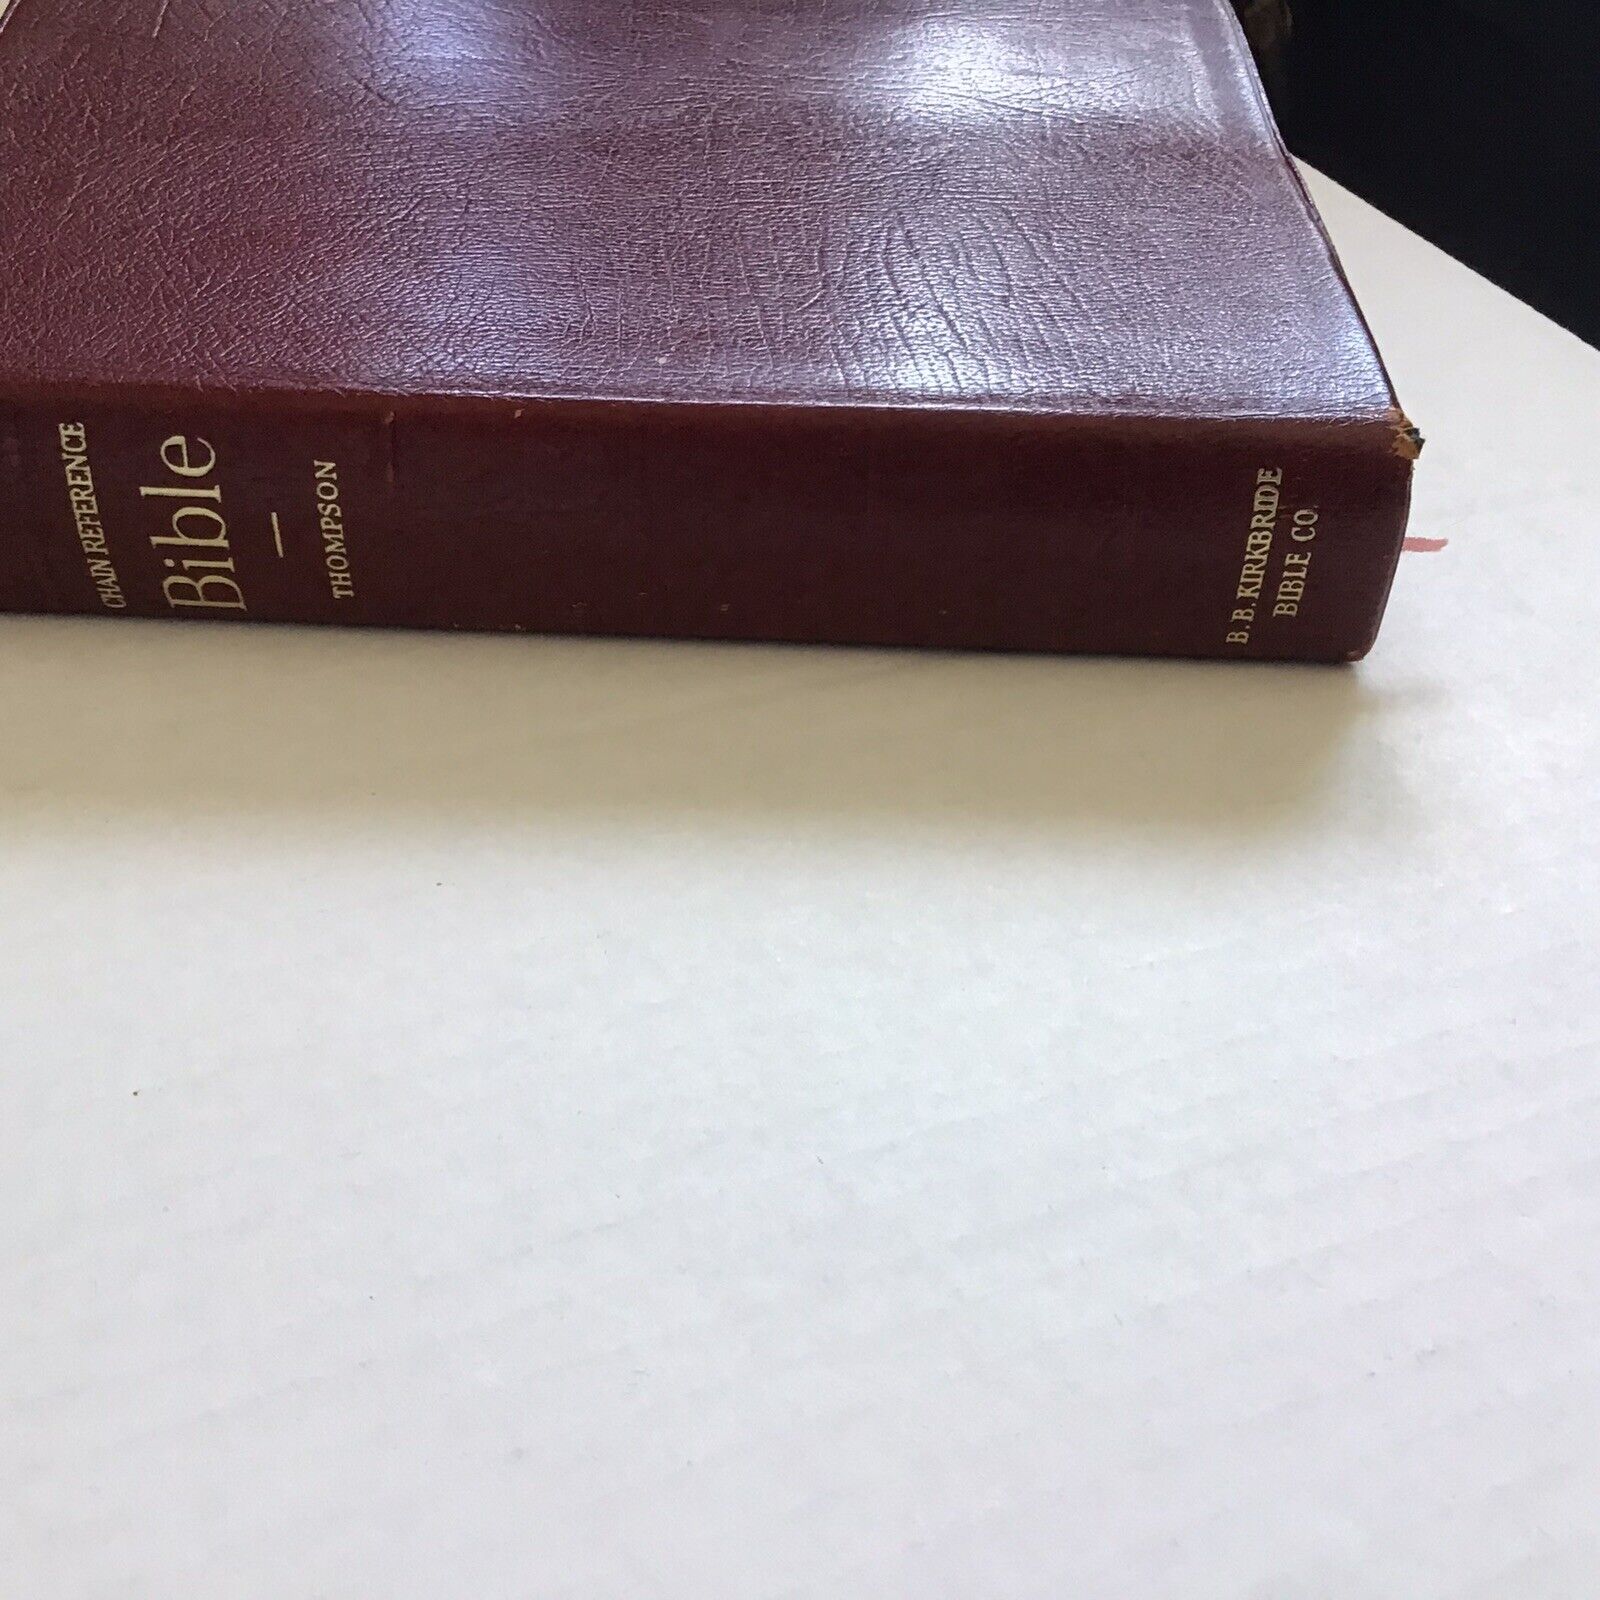 Thompson Chain Reference Bible KJV 1964. Red Leather Bound